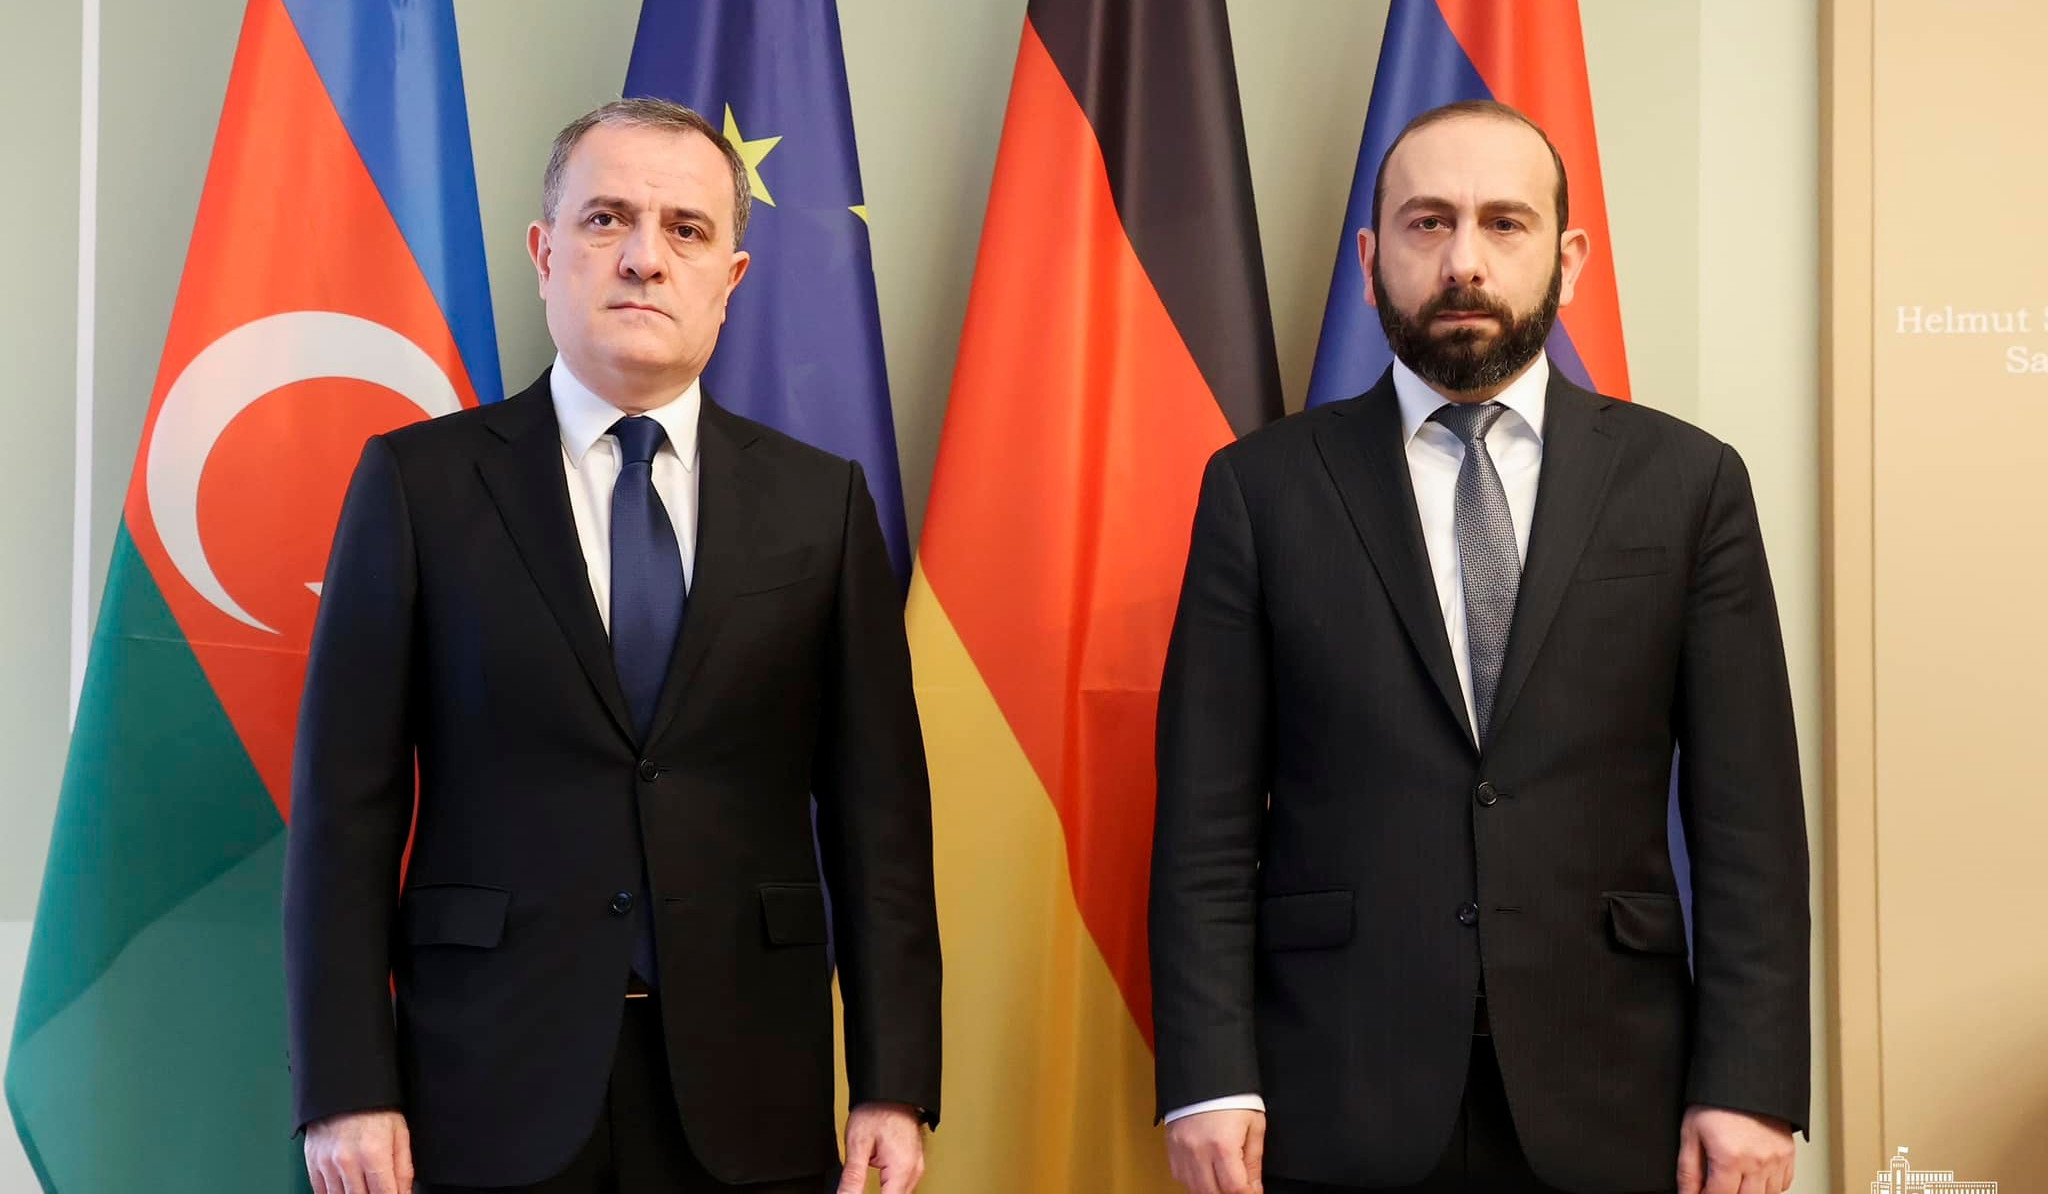 Meeting of delegations led by Ararat Mirzoyan and Jeyhun Bayramov started in Berlin